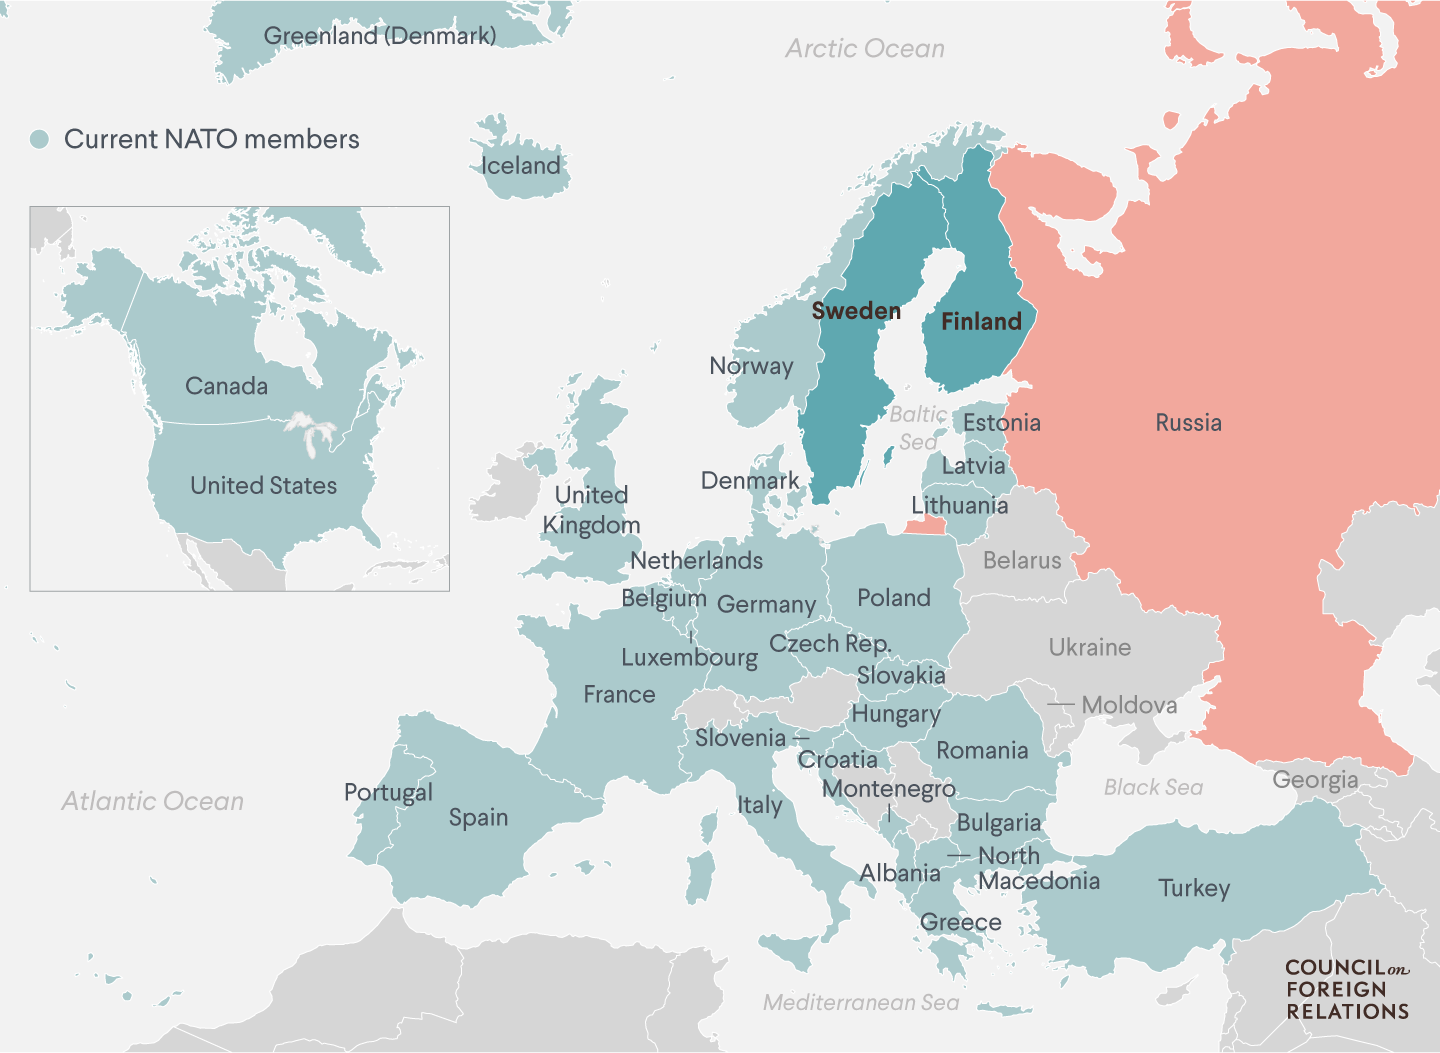 A map of Europe highlighting current NATO members, Finland and Sweden, and Russia